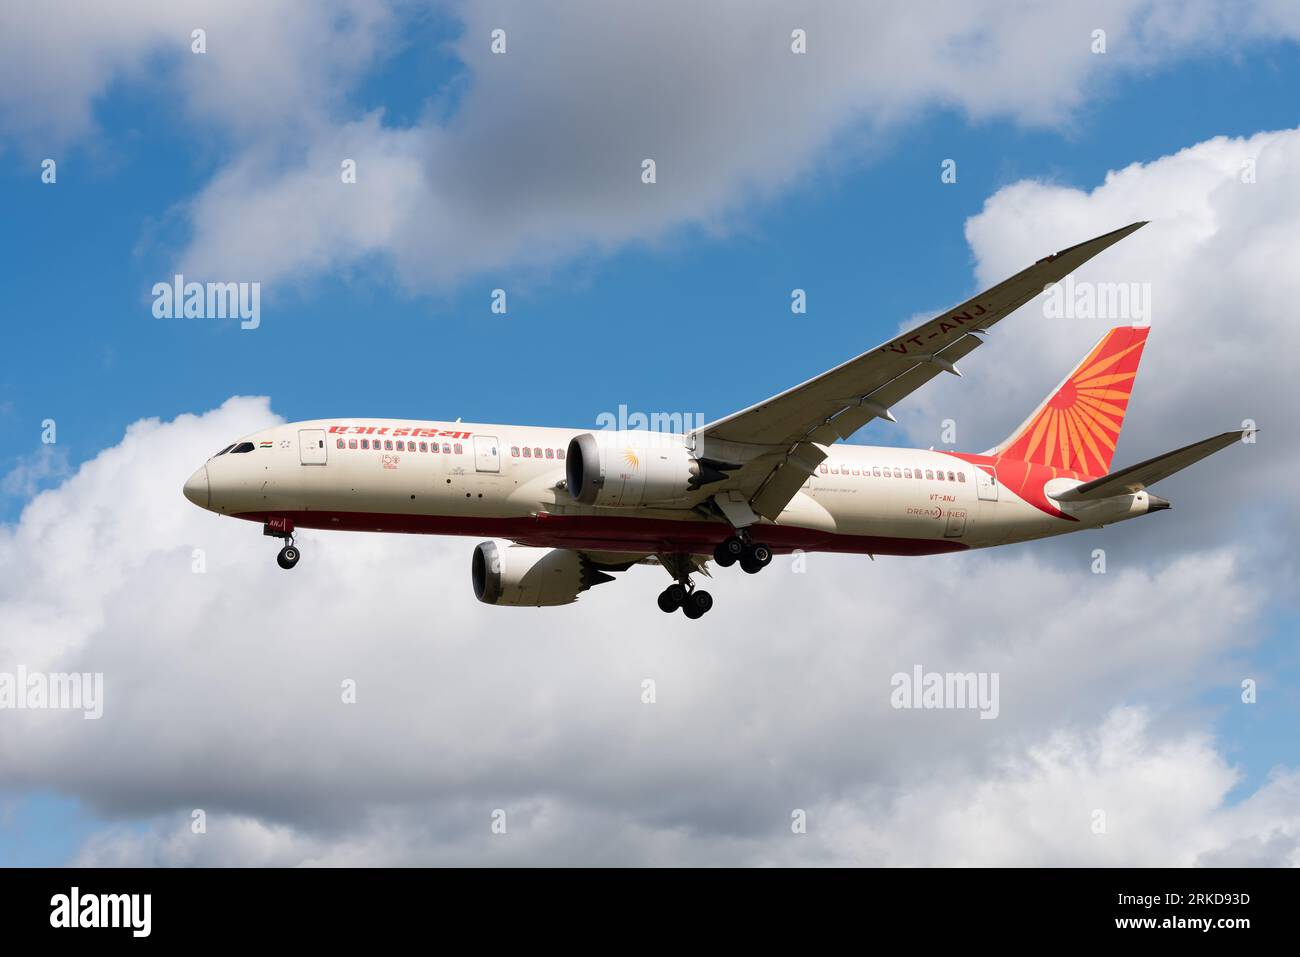 Air India Boeing 787-8 Dreamliner jet airliner plane VT-ANJ on finals to land at London Heathrow Airport, UK. Owned by Talace Private Limited, of Tata Stock Photo